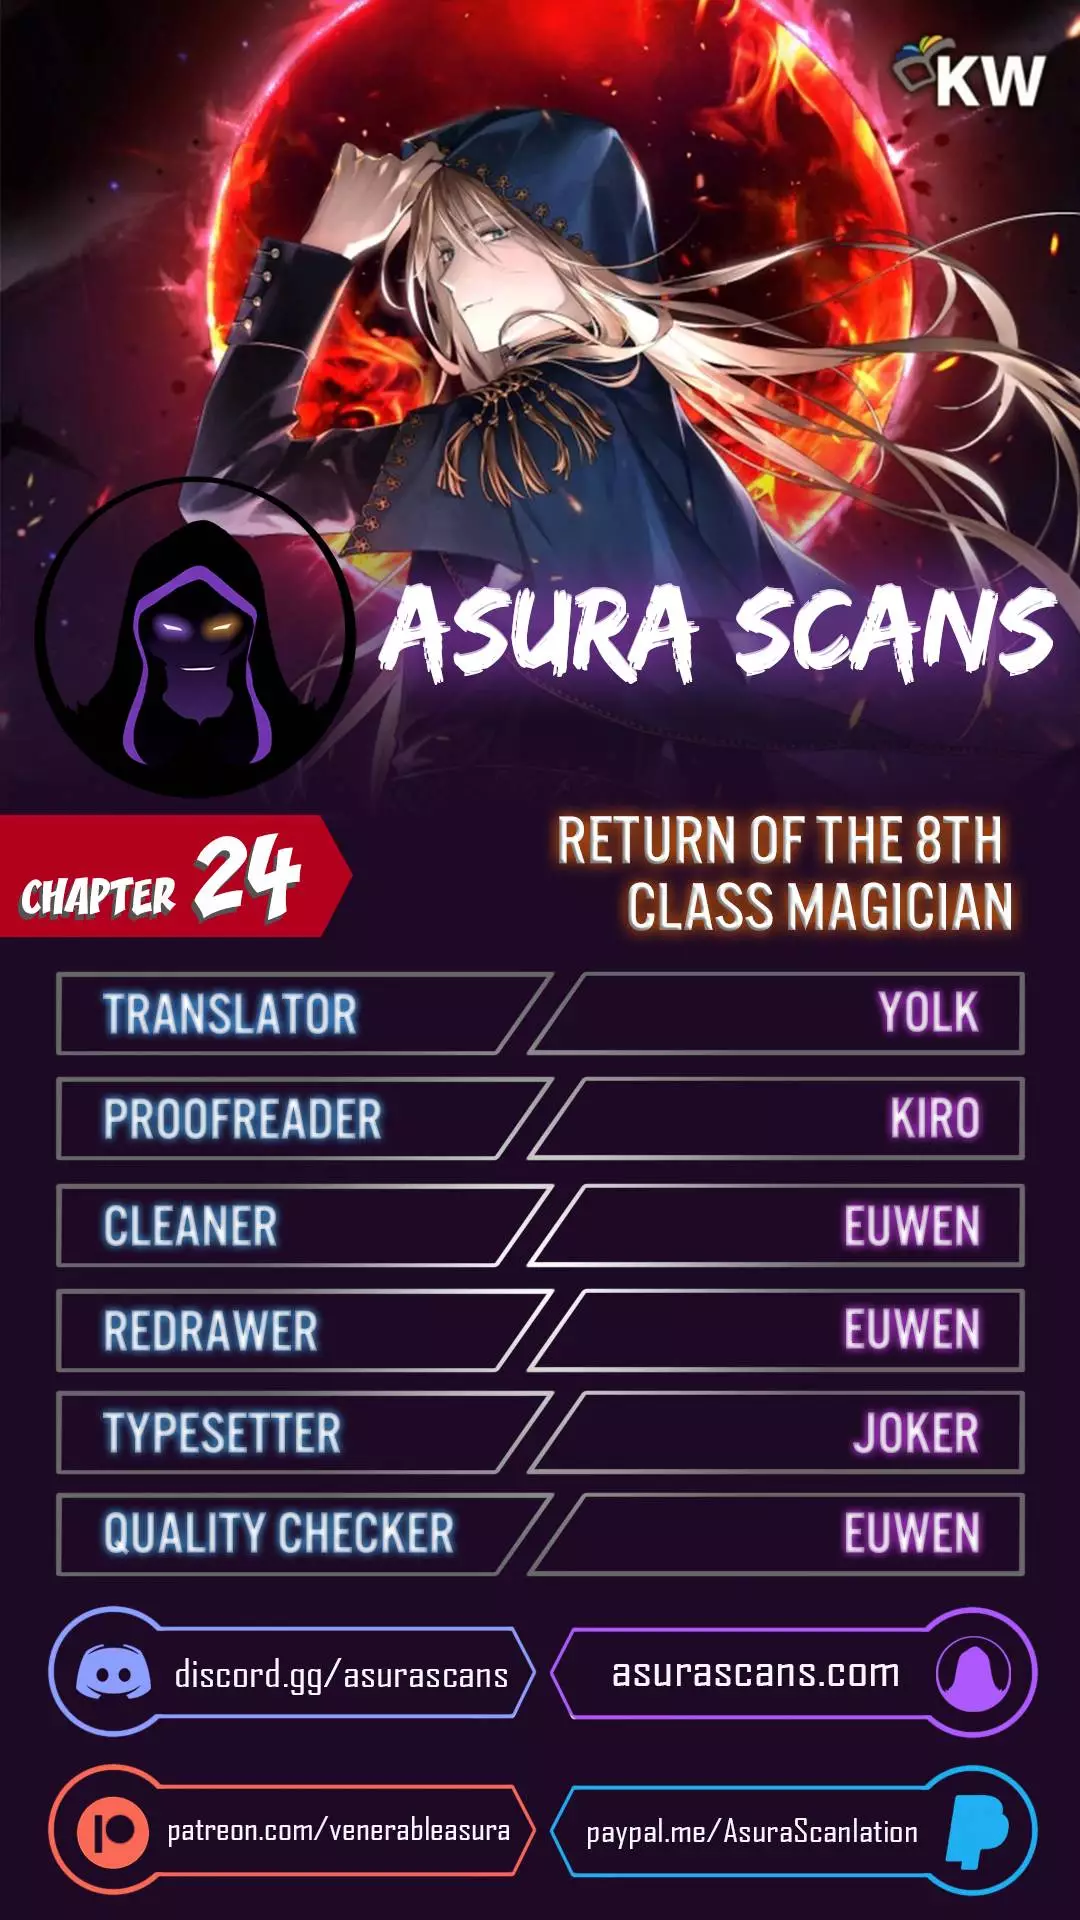 The Return Of The 8Th Class Magician - 24 page 1-0310d500